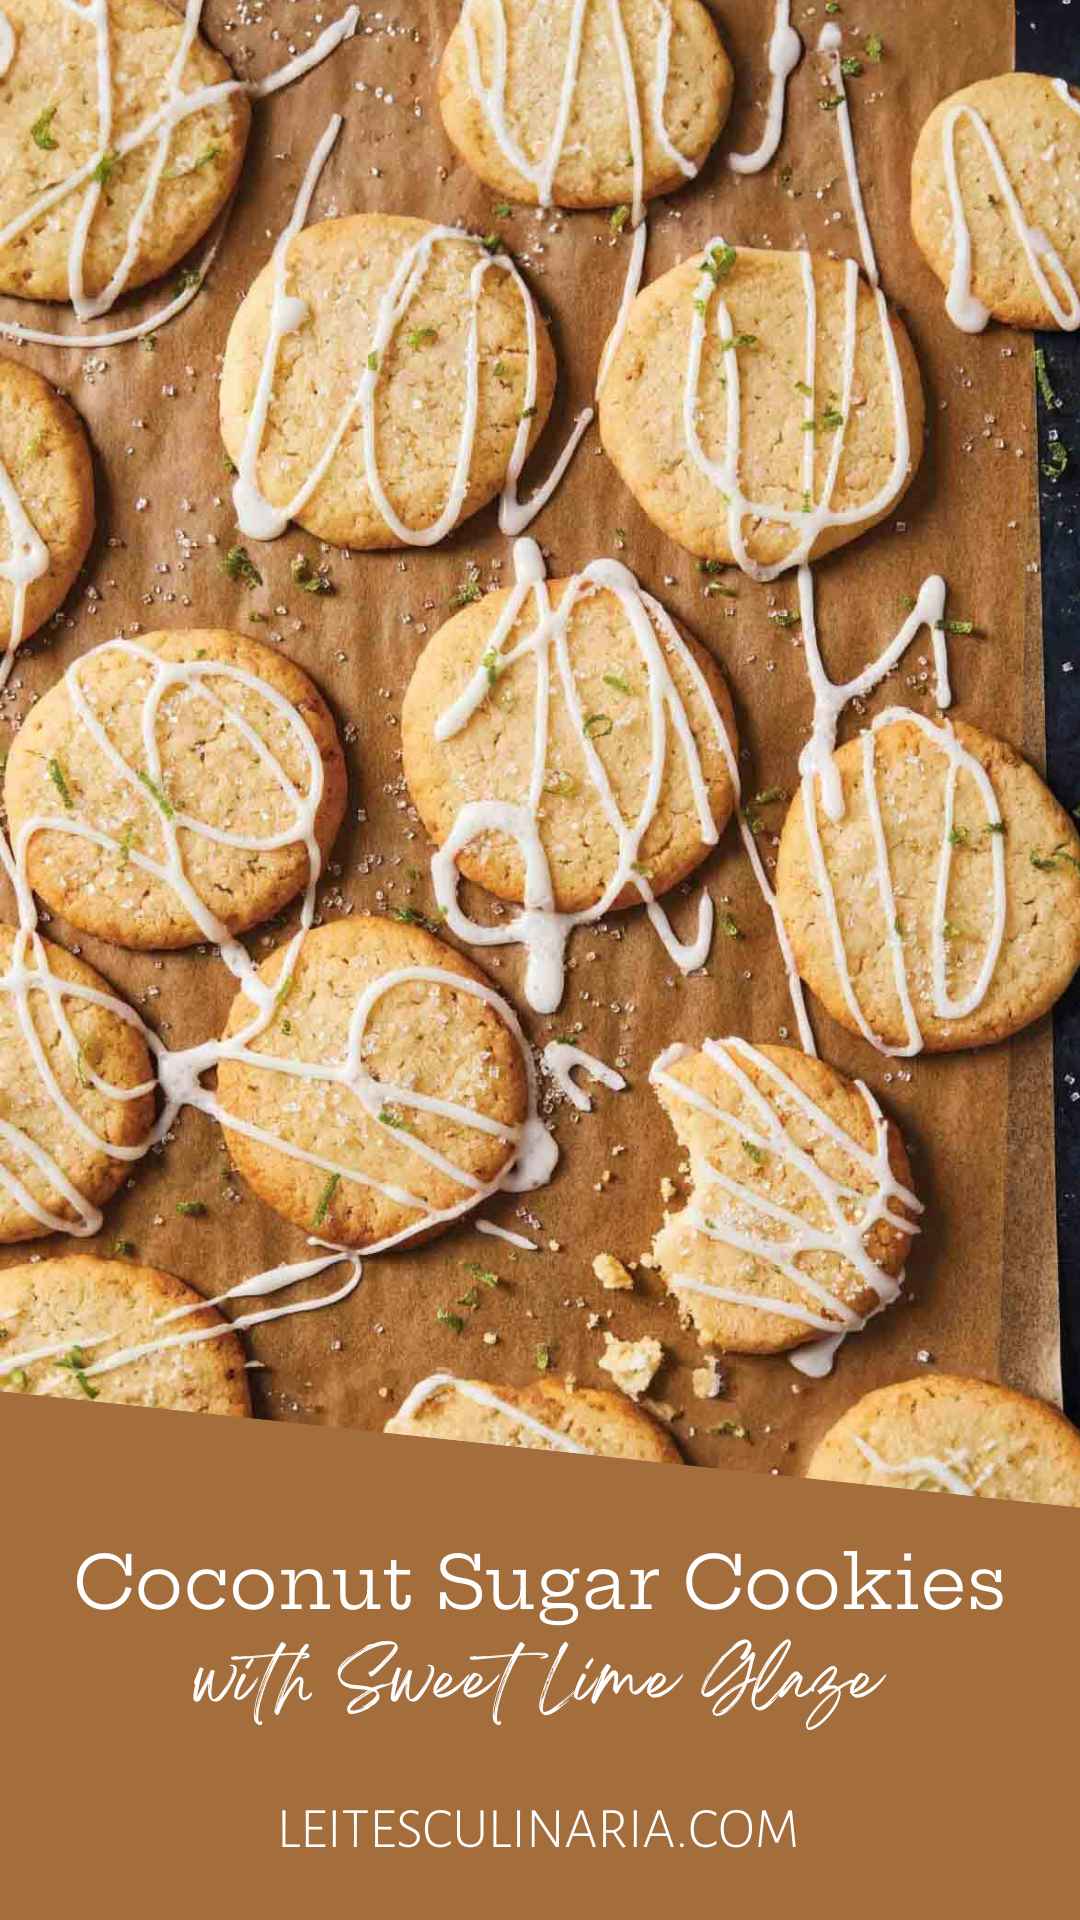 Several coconut lime cookies drizzled with glaze and sprinkled with lime zest on a wooden cutting board.